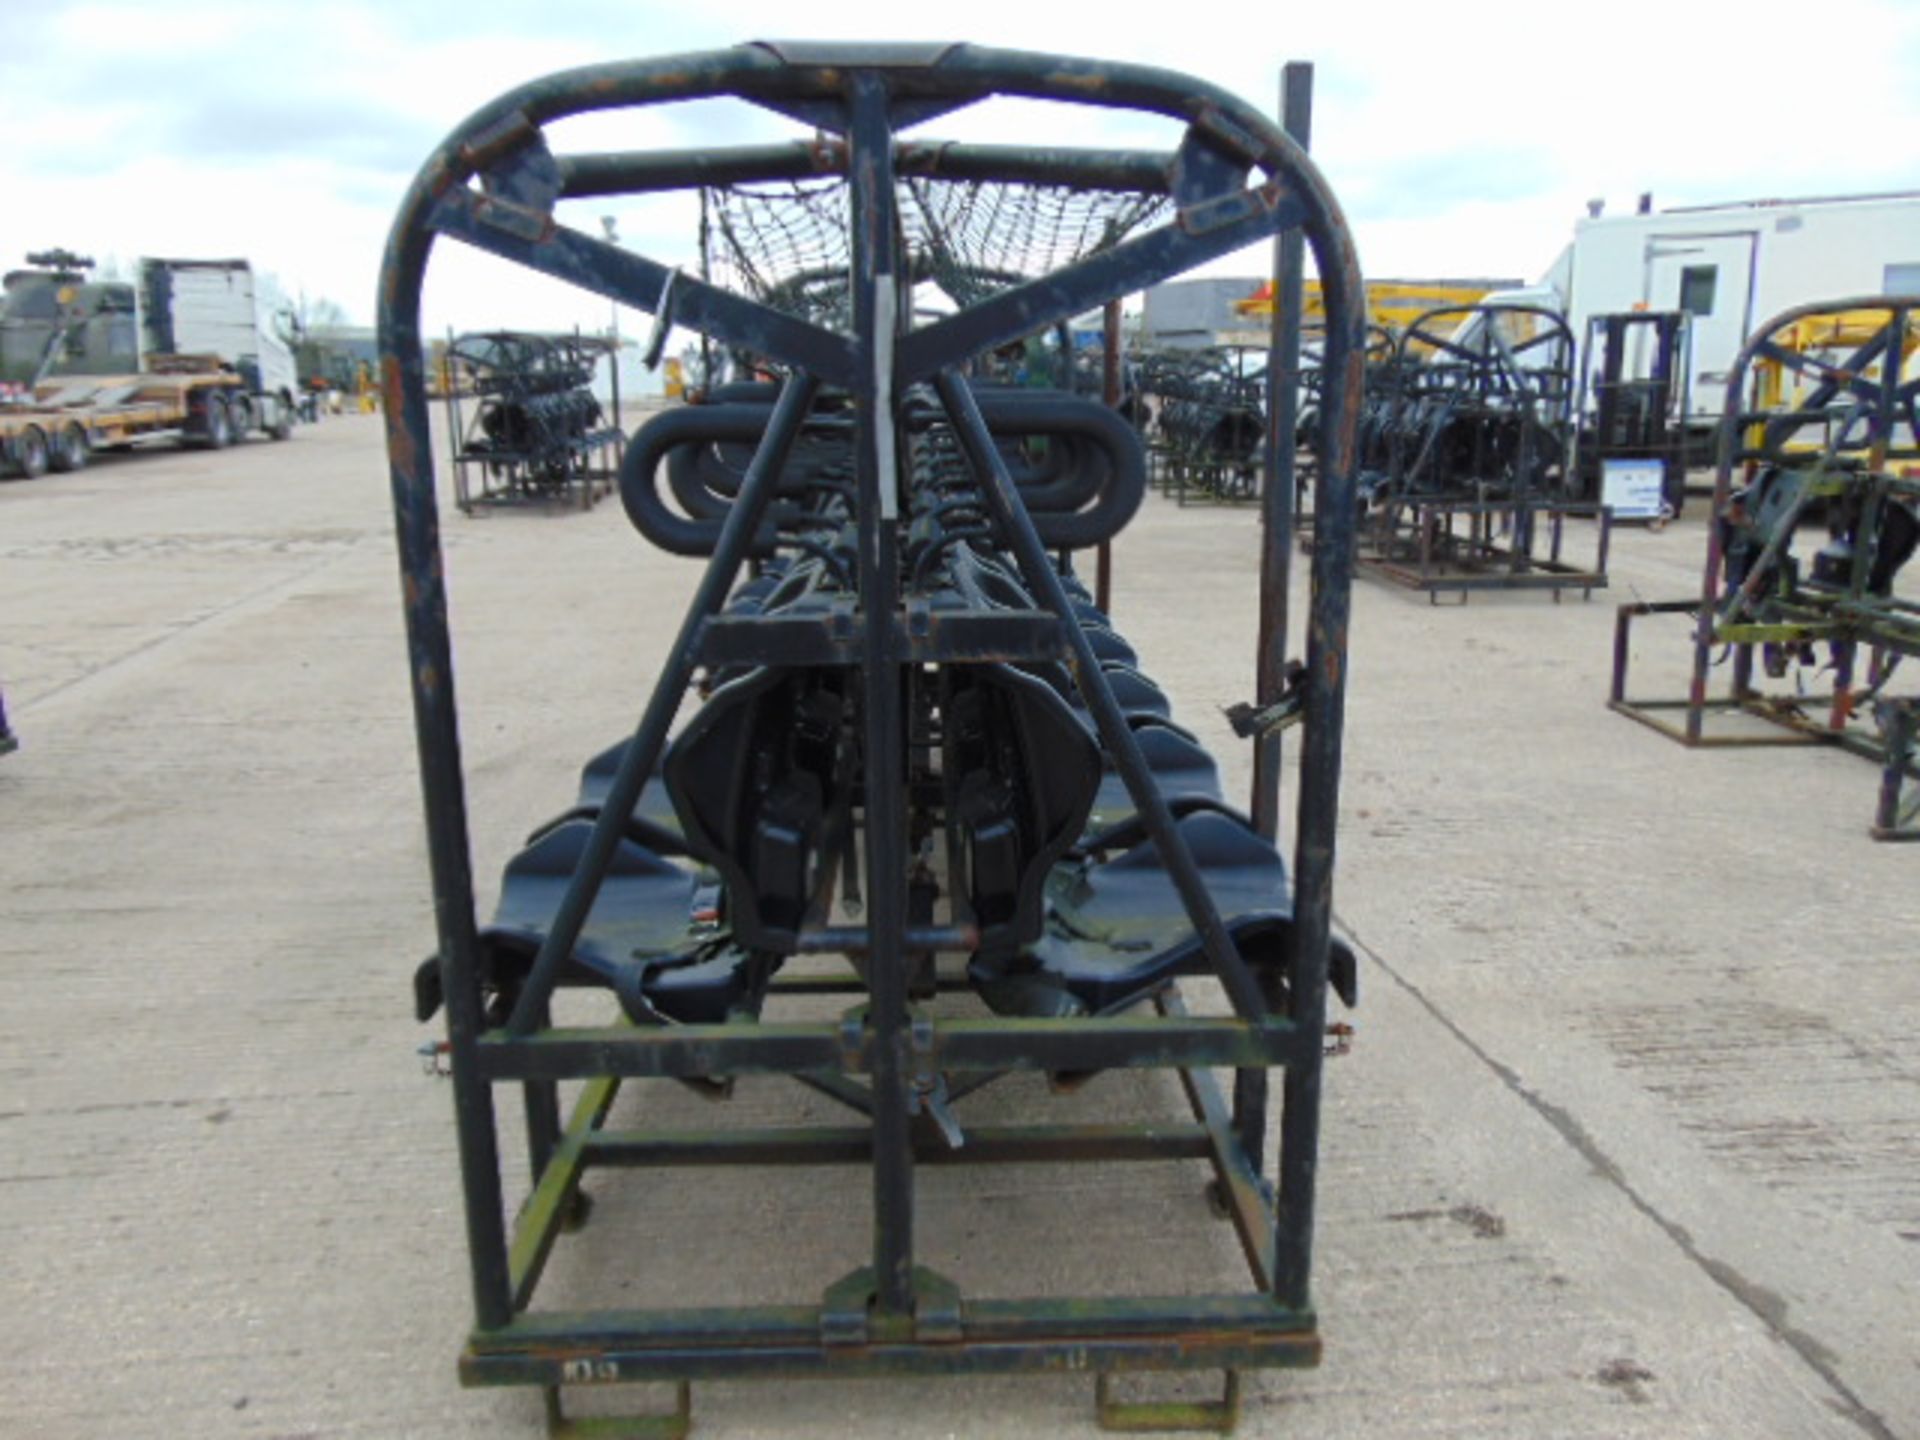 14 Man ROPS Security Seat suitable for Leyland Dafs, Bedfords etc - Image 3 of 6